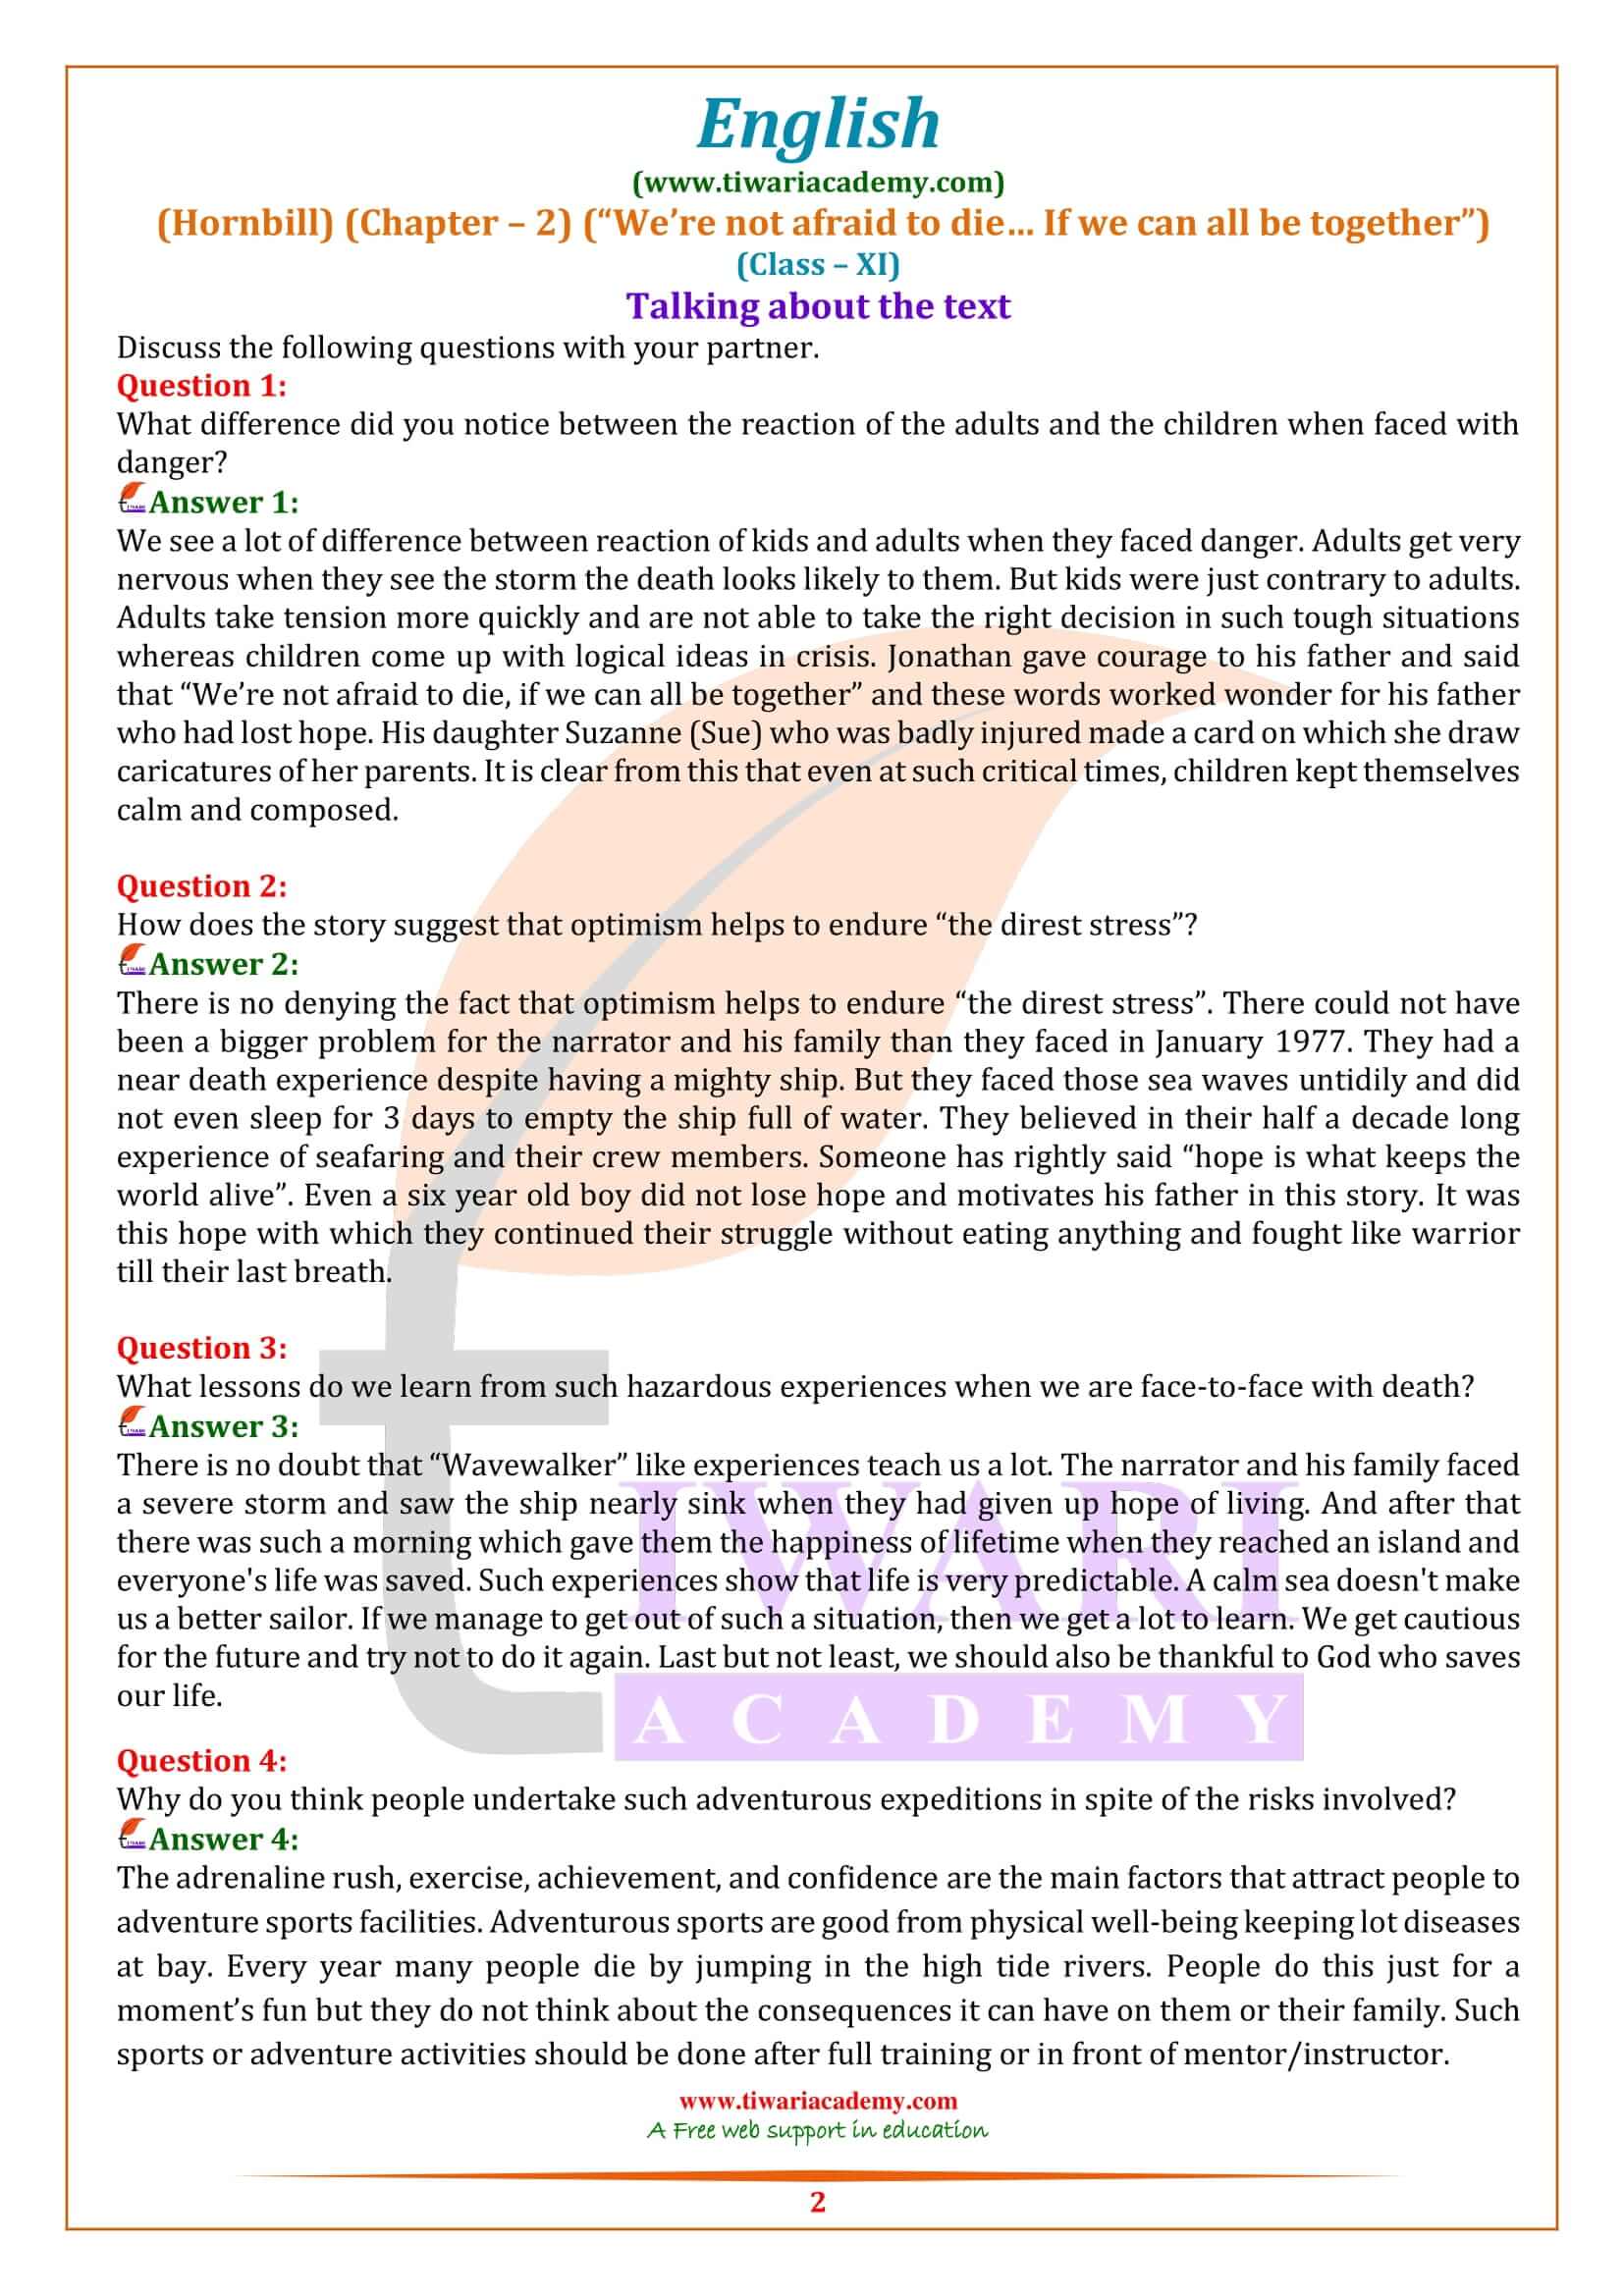 NCERT Solutions for Class 11 English Hornbill Chapter 2 Answers